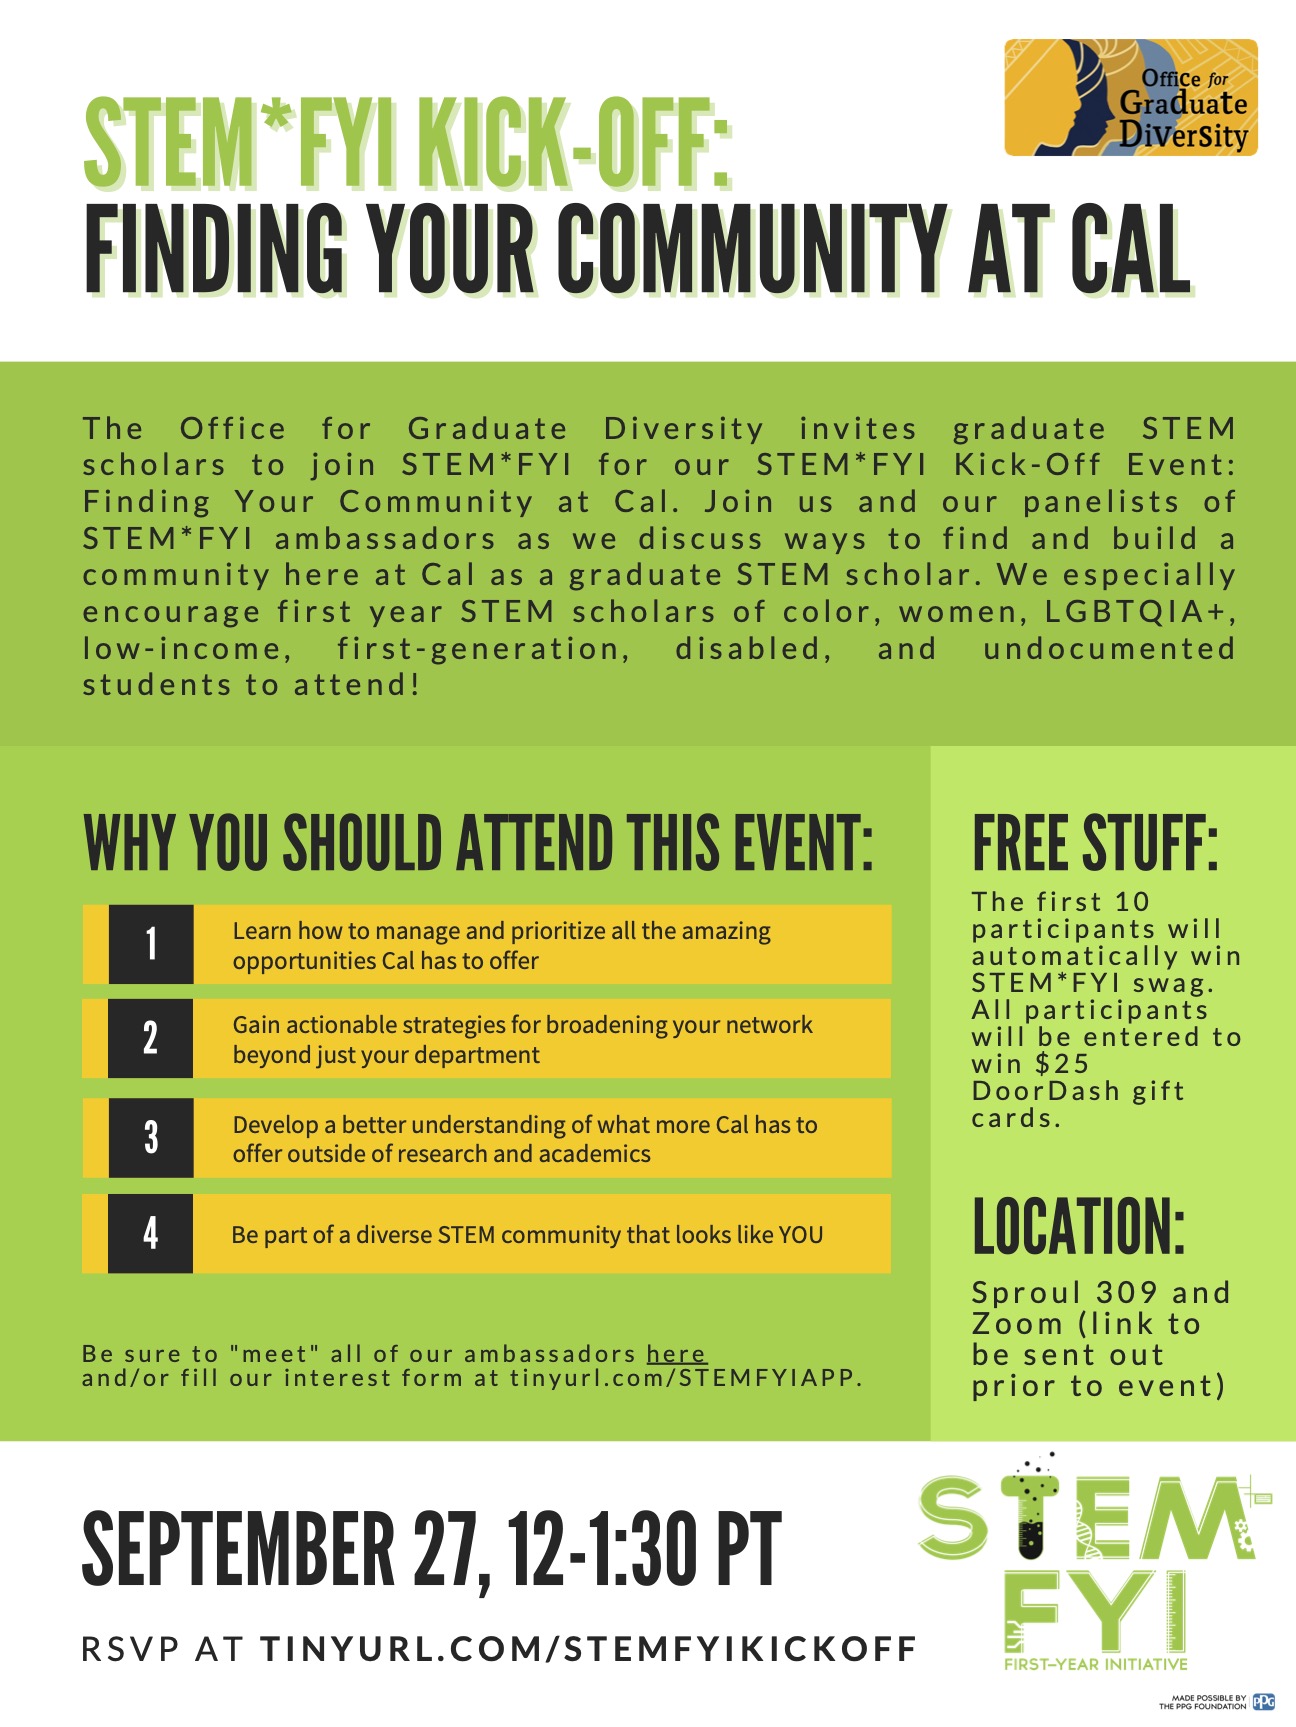 STEMFYI Kick-Off Finding Your Community at Cal